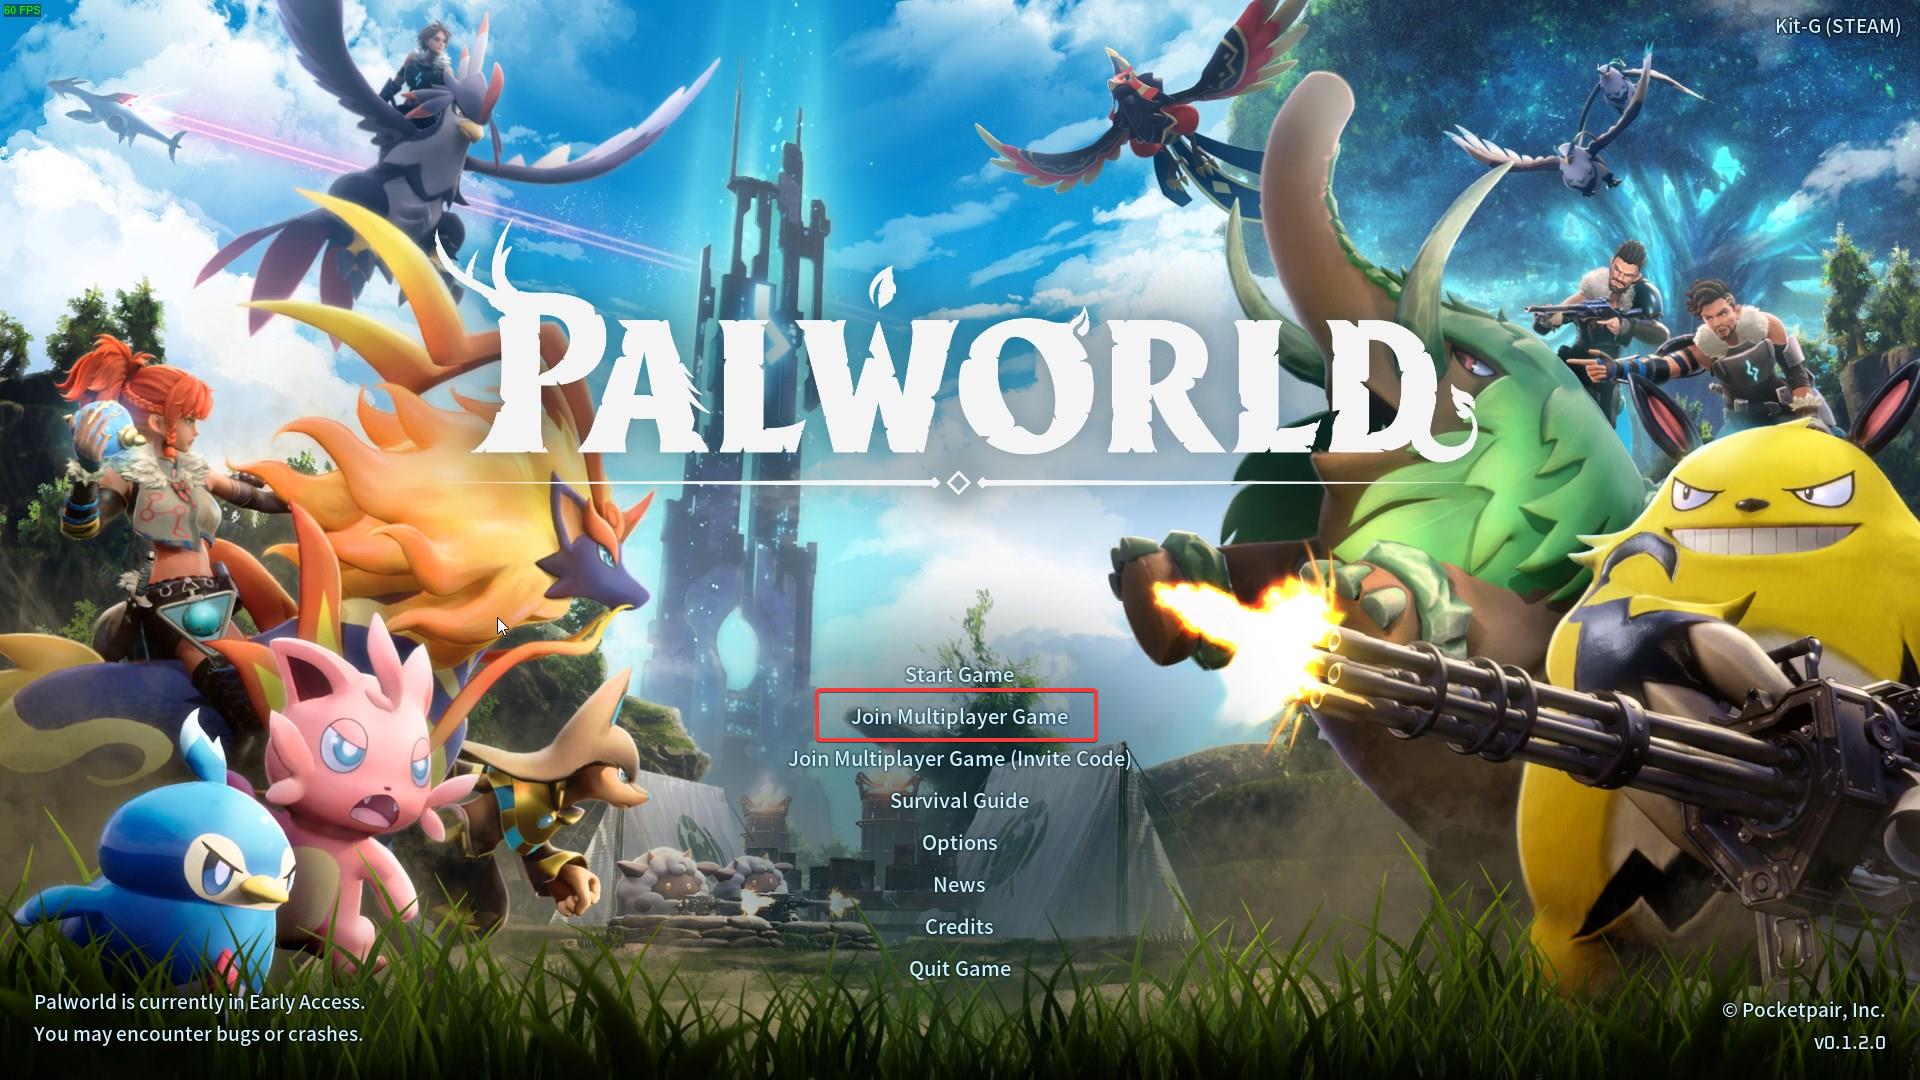 Main menu with 'Join Multiplayer Game' highlighted